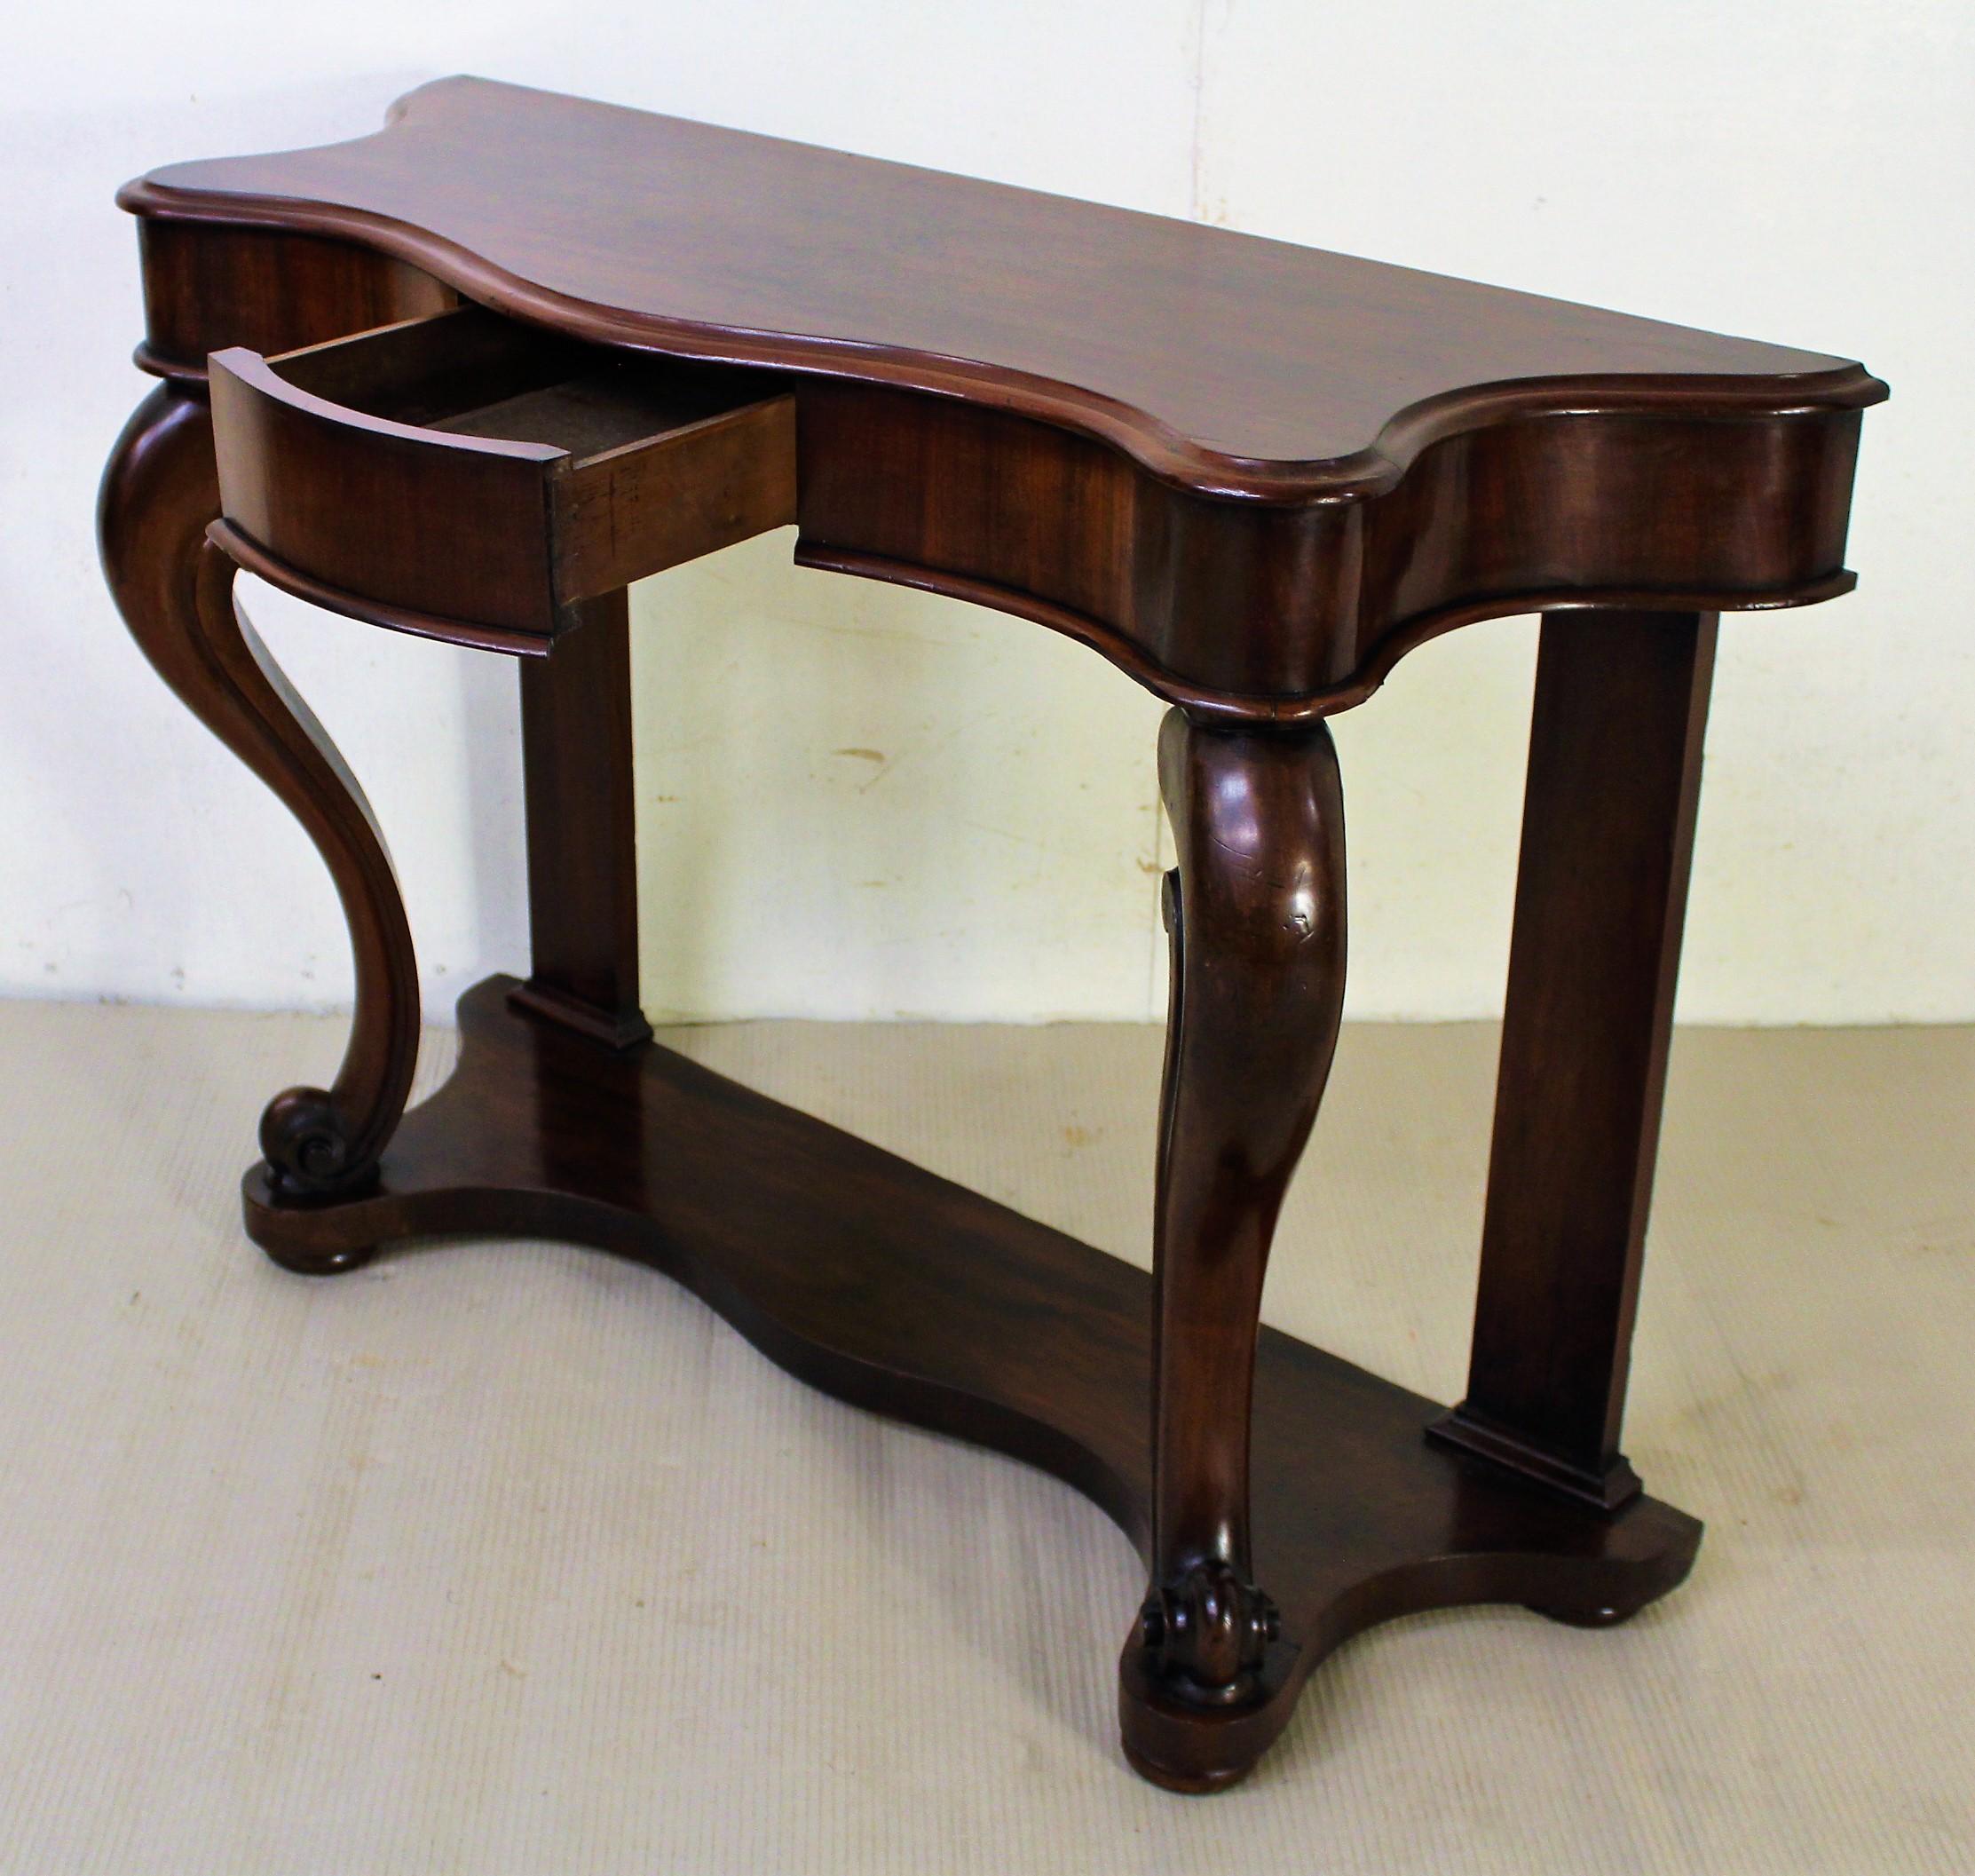 A splendid mid-Victorian period mahogany serpentine fronted console, or hall, table. Of very good construction and with a single drawer to the freeze. With scrolling cabriole front legs, united by an under-tier. Would sit well within in a number of